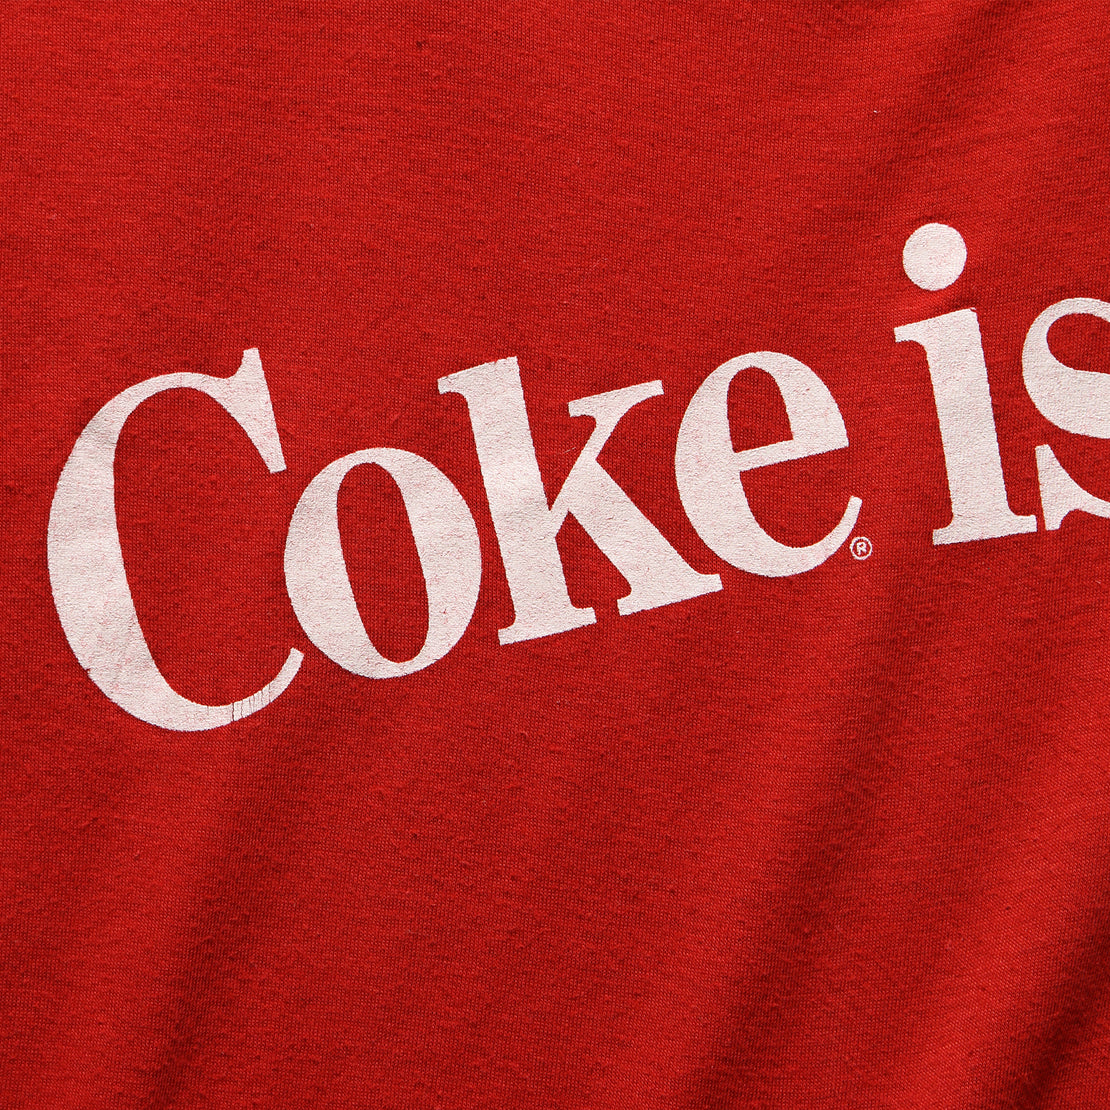 Coke is it! T-Shirt - Red - Vintage - STAG Provisions - W - One & Done - Apparel